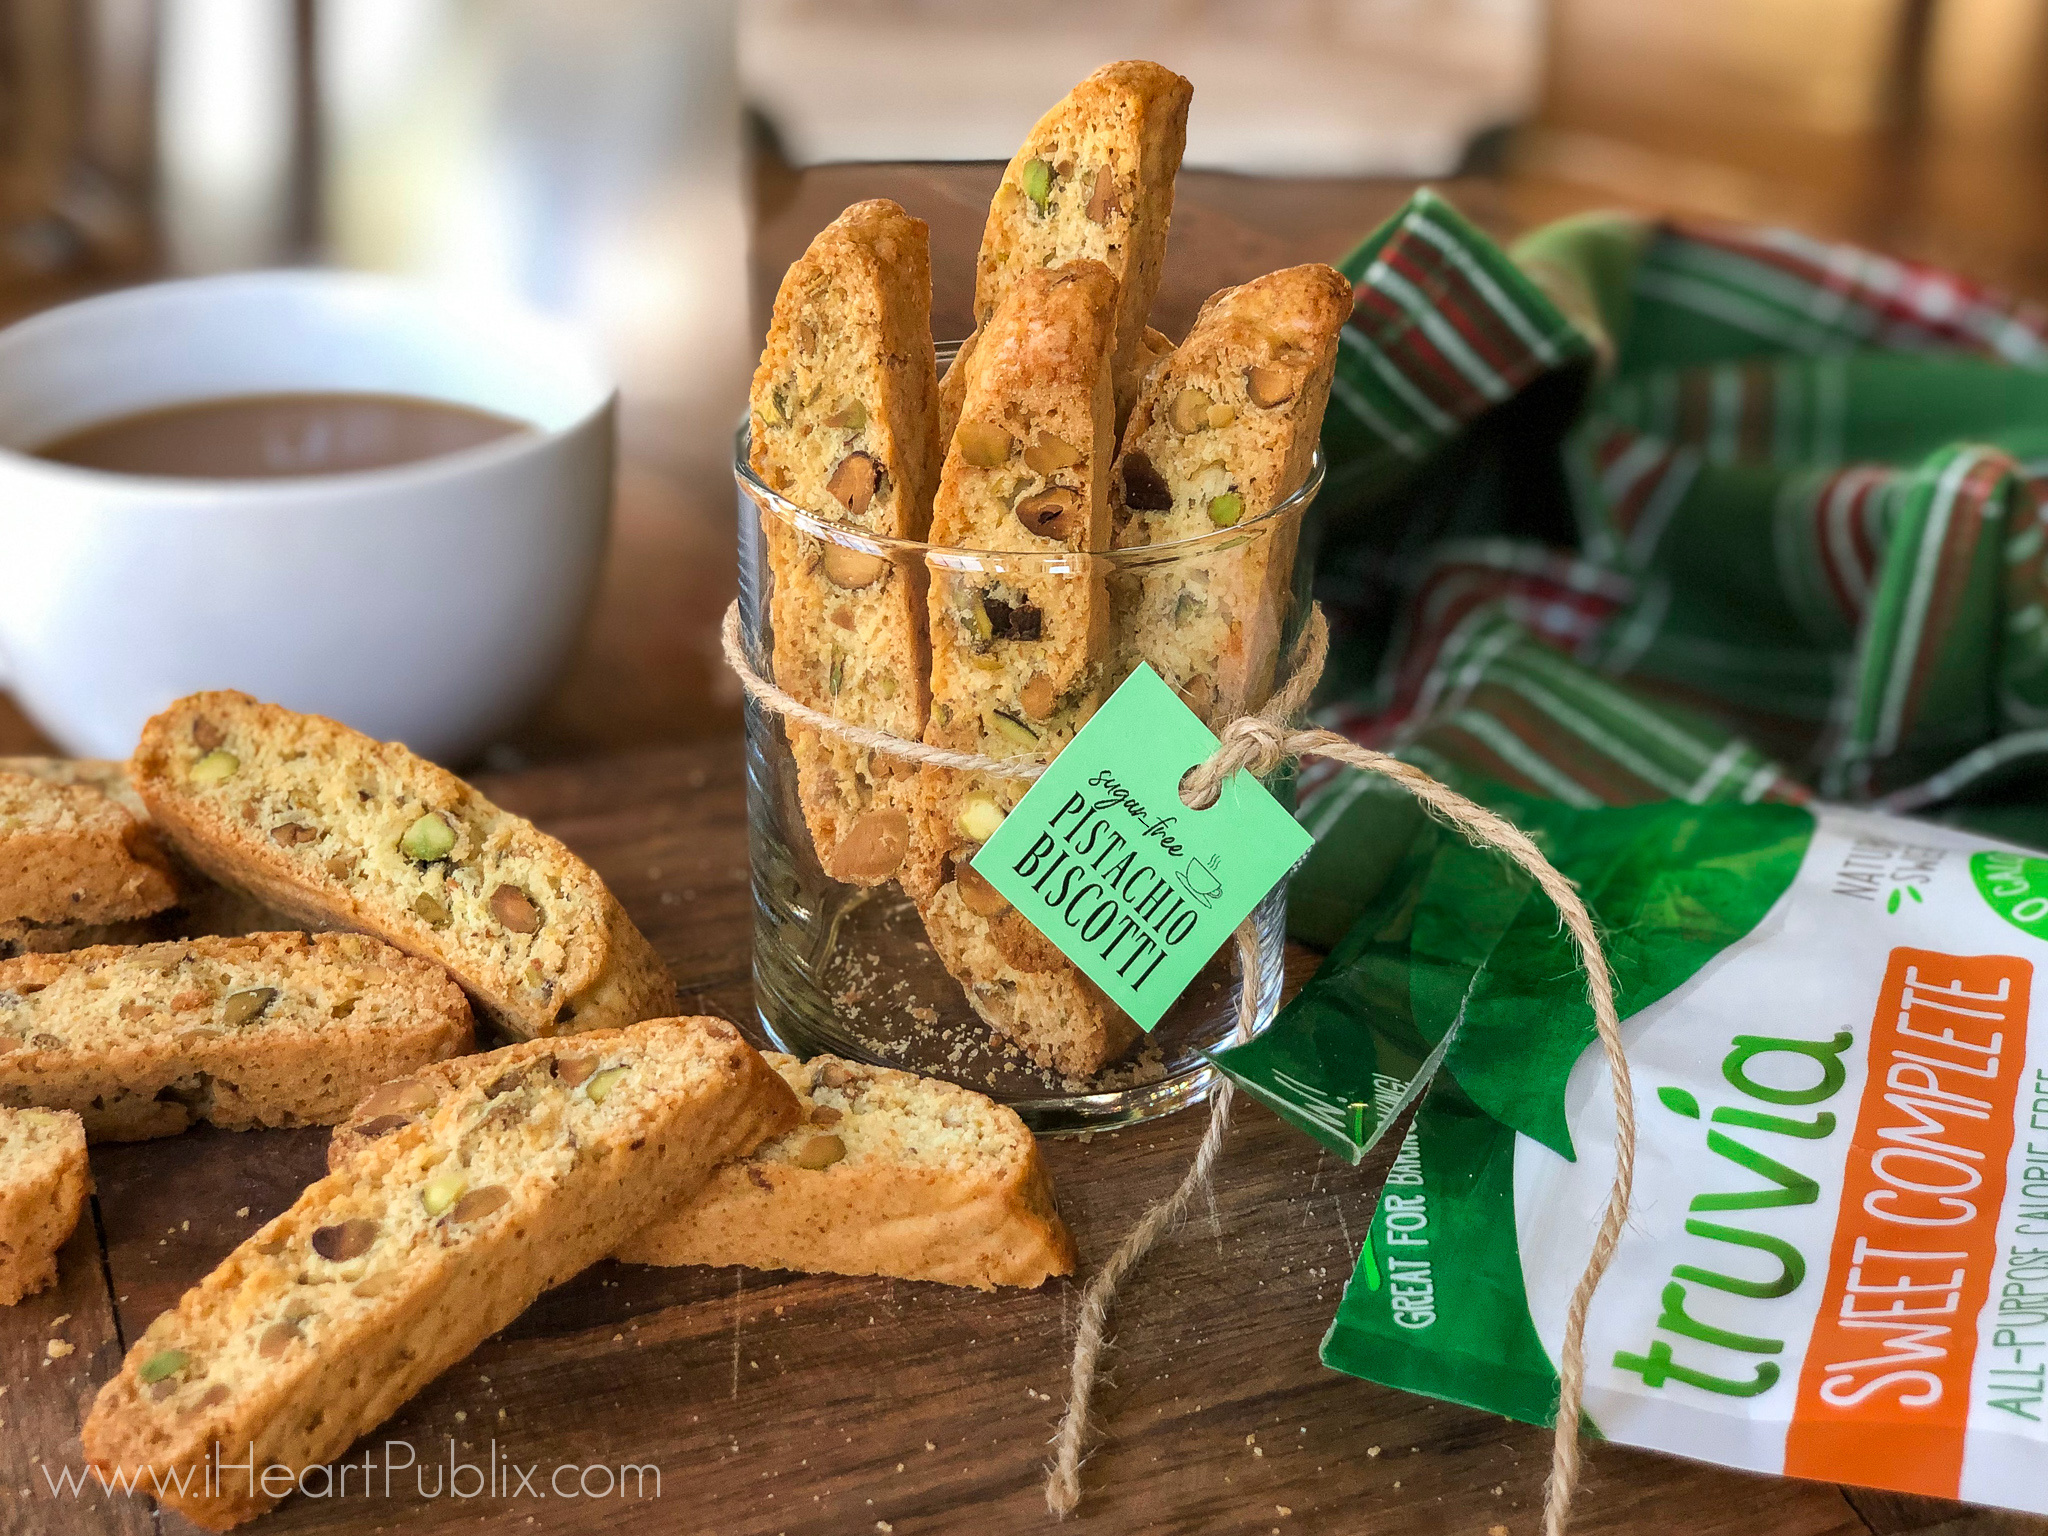 Sugar-Free Pistachio Biscotti Made With Truvia® Sweet Complete™ All-Purpose Sweetener - Grab Big Savings At Publix on I Heart Publix